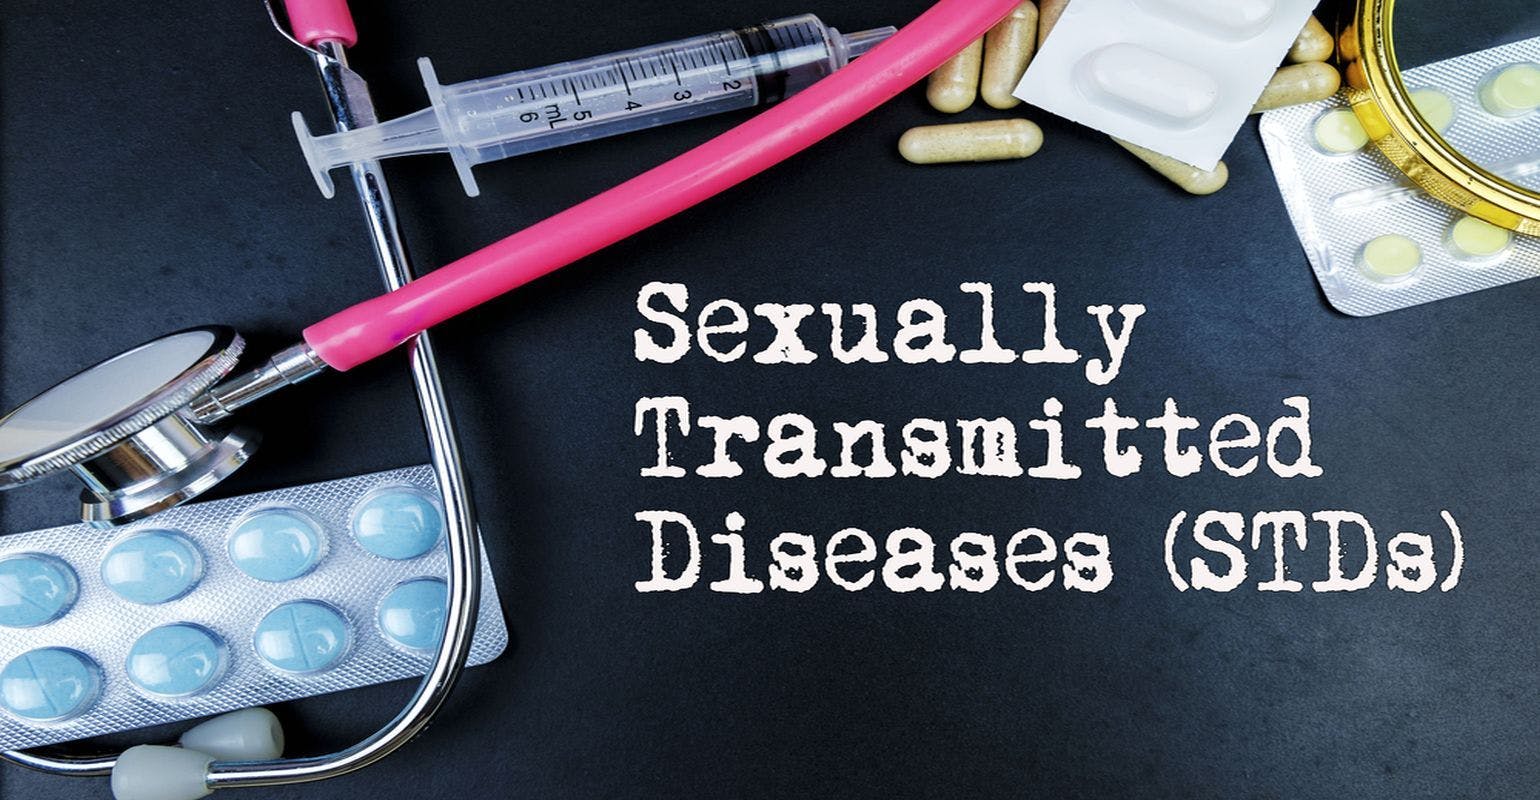 Preventing Sexually Transmitted and Bloodborne Infections Among Sex Workers